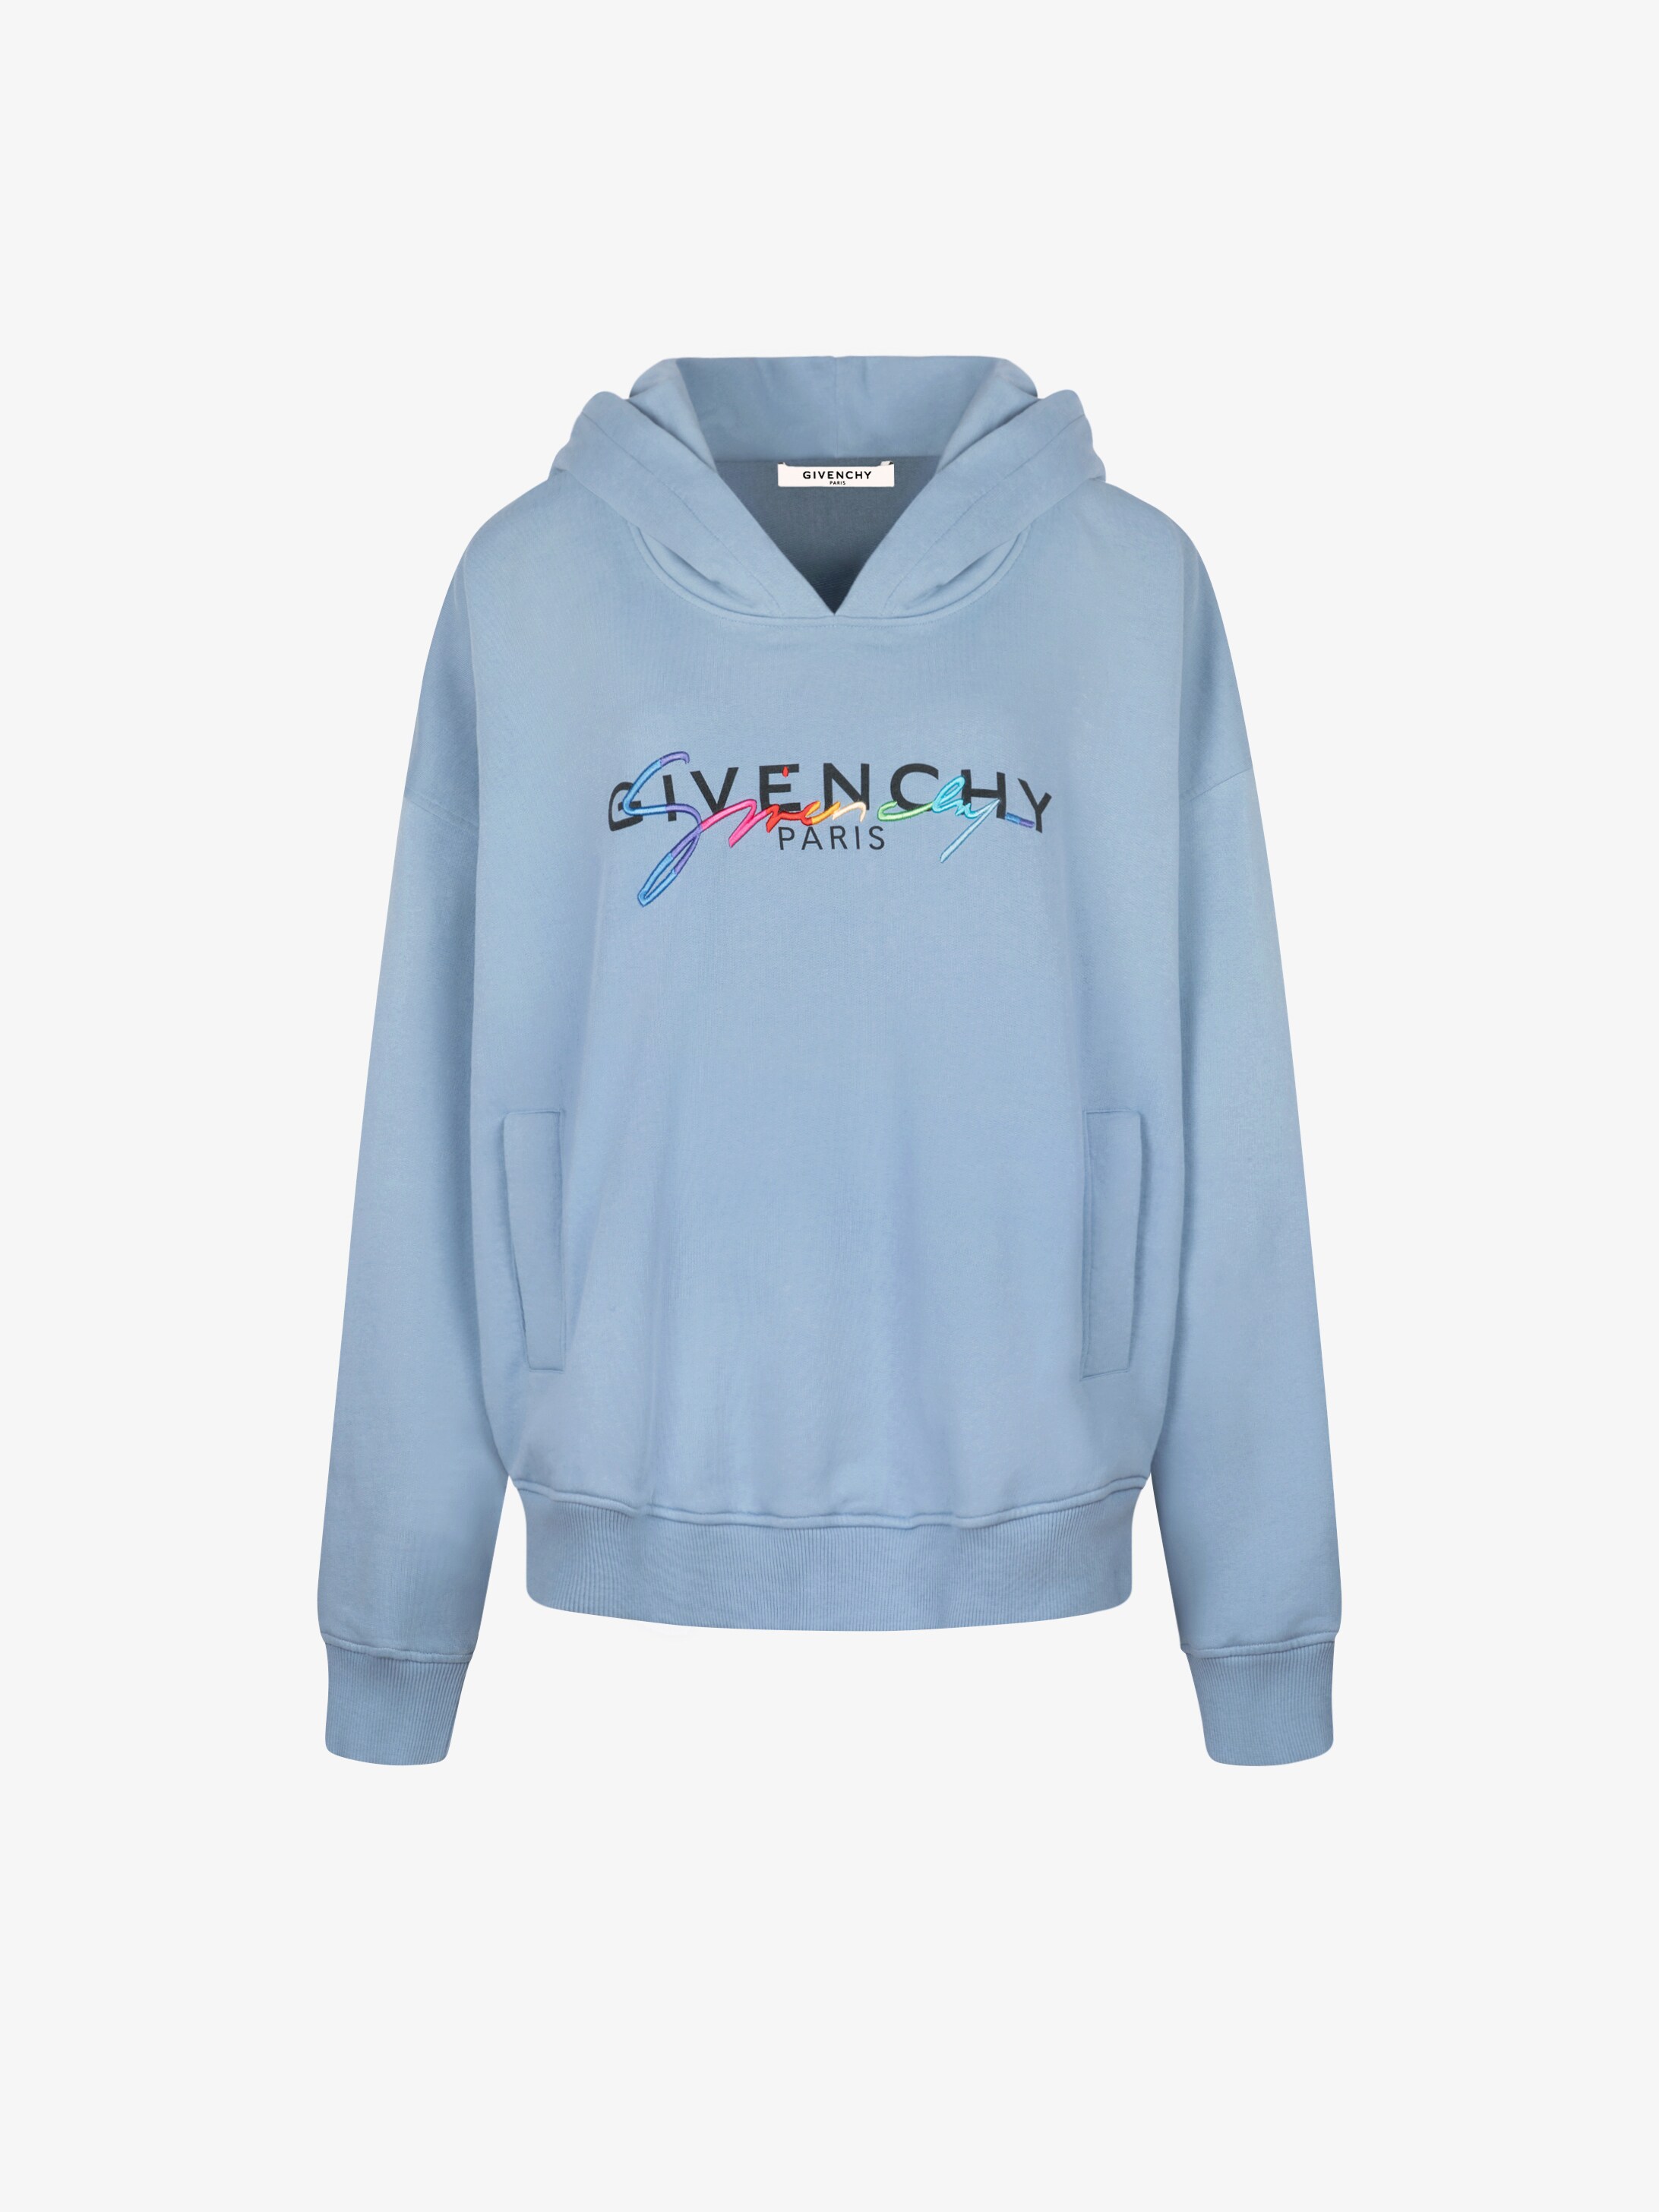 GIVENCHY PARIS vintage oversized hoodie 